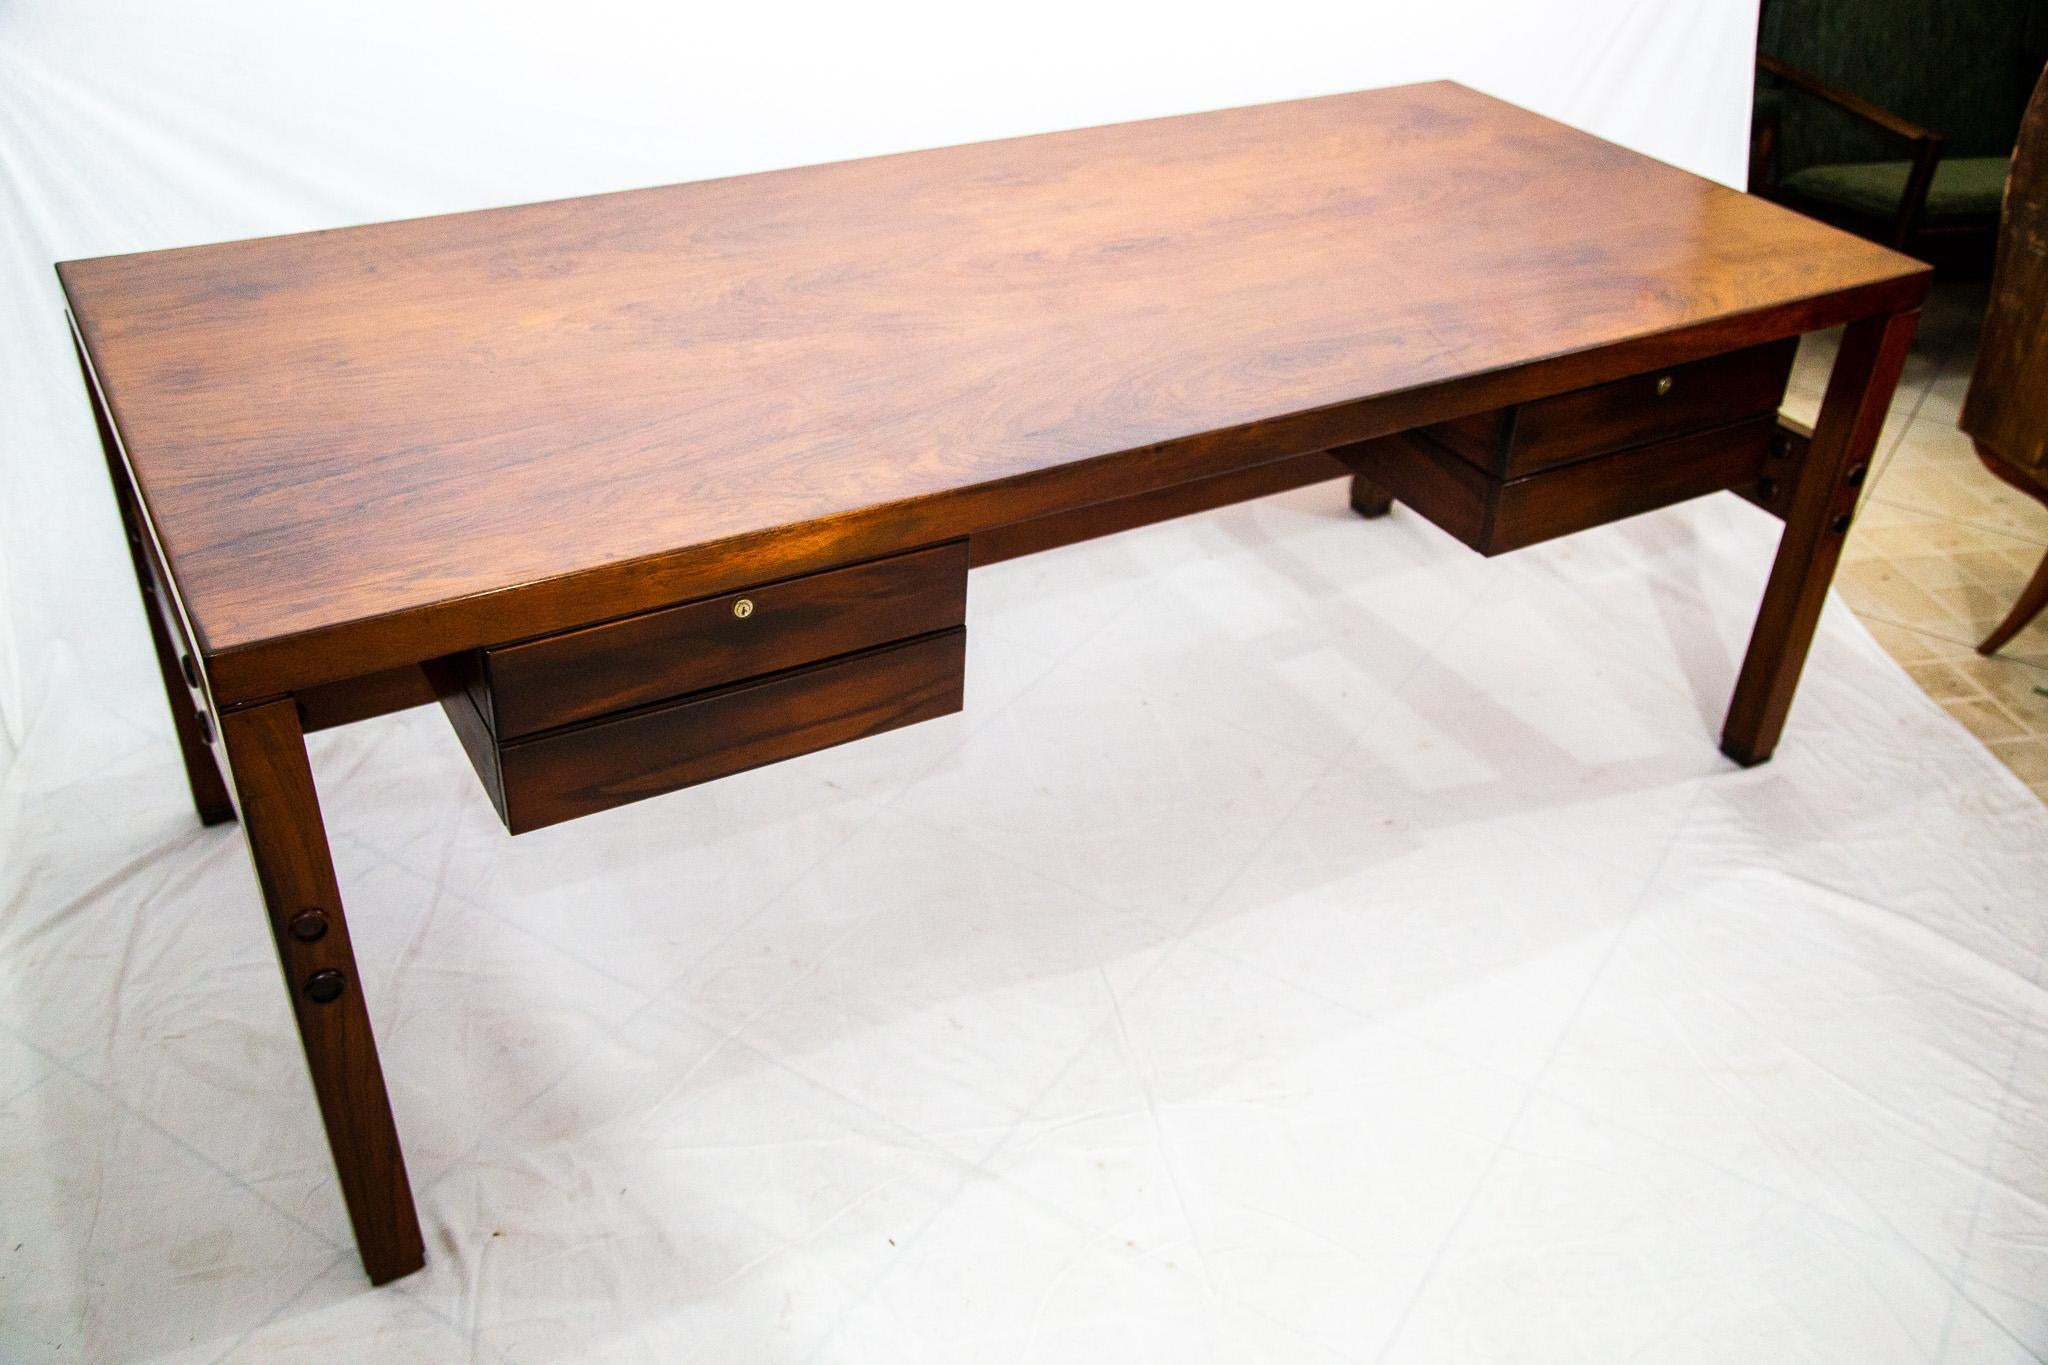 Brazilian Modern Desk in Hardwood with Floating Drawers, Sergio Rodrigues, 1960s For Sale 4